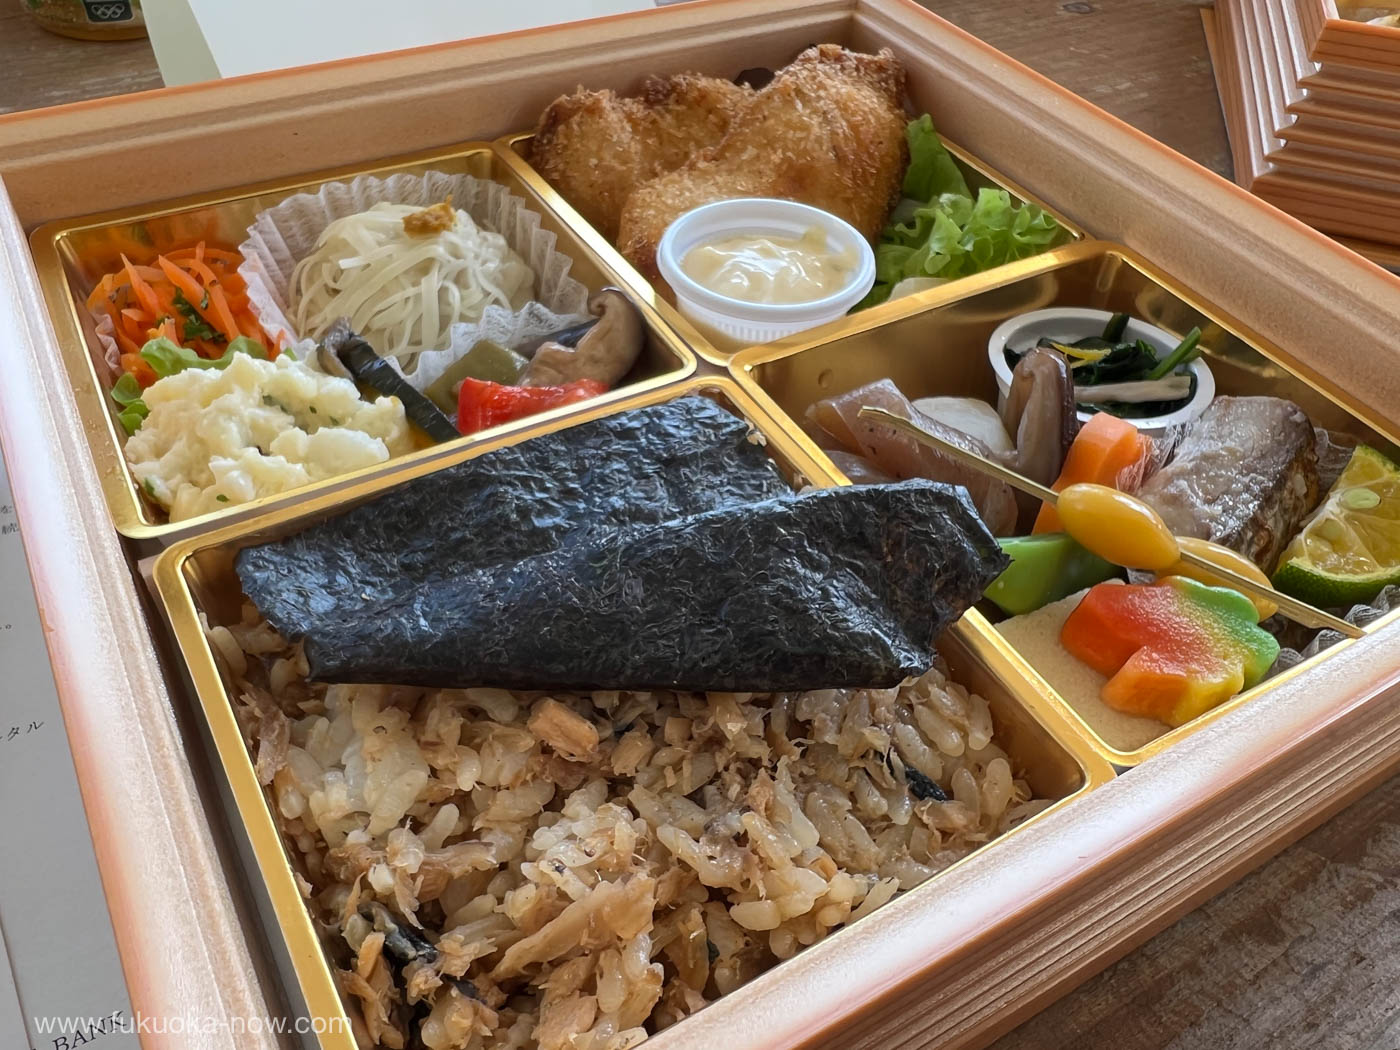 Special boxed lunch made using local fish caught in Himeshima, うお旅特製の弁当、メインは姫島の地魚